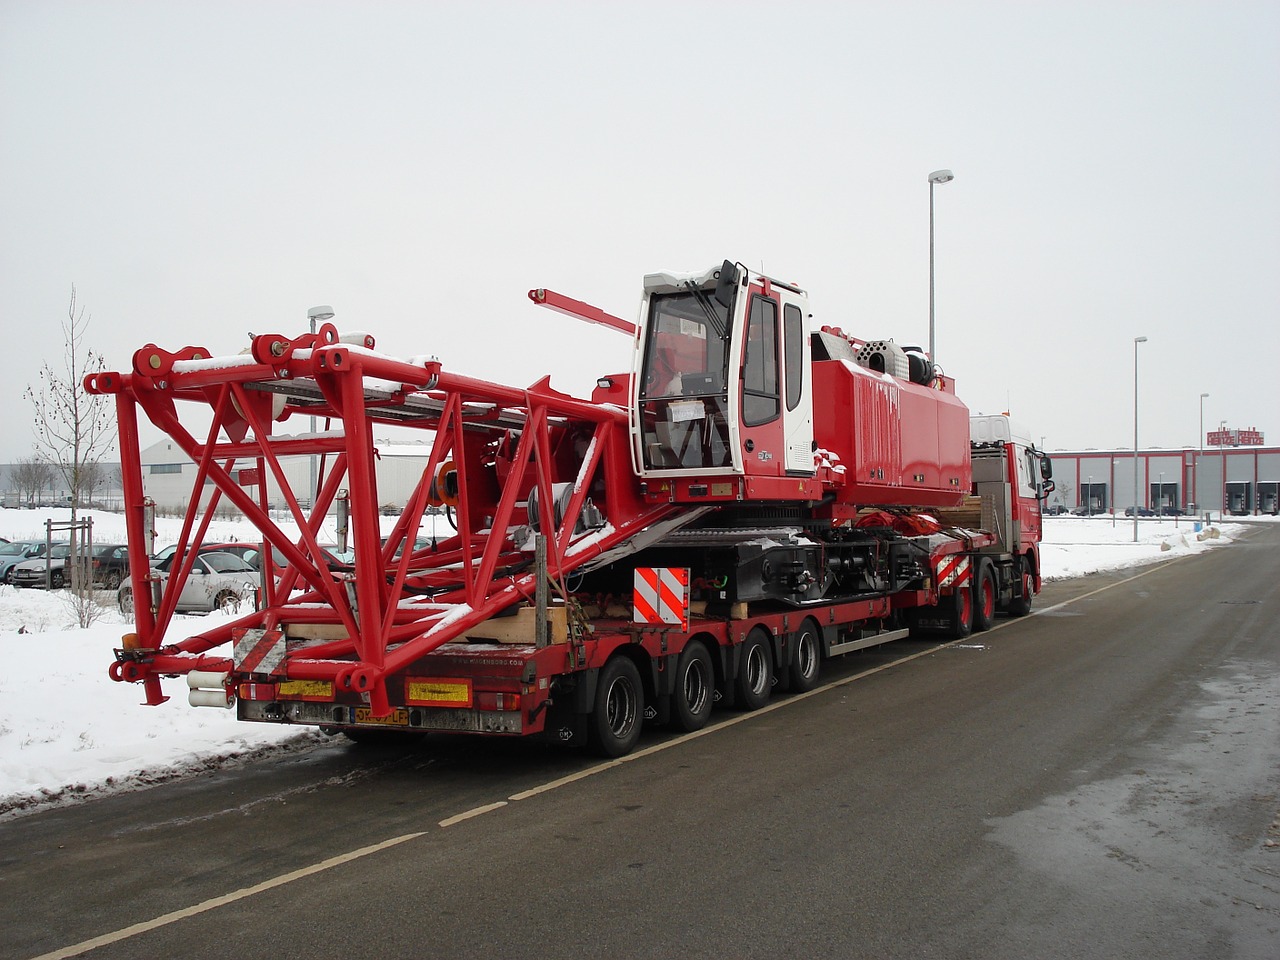 Investing in Crawler Cranes with eCranes is a Sound Move